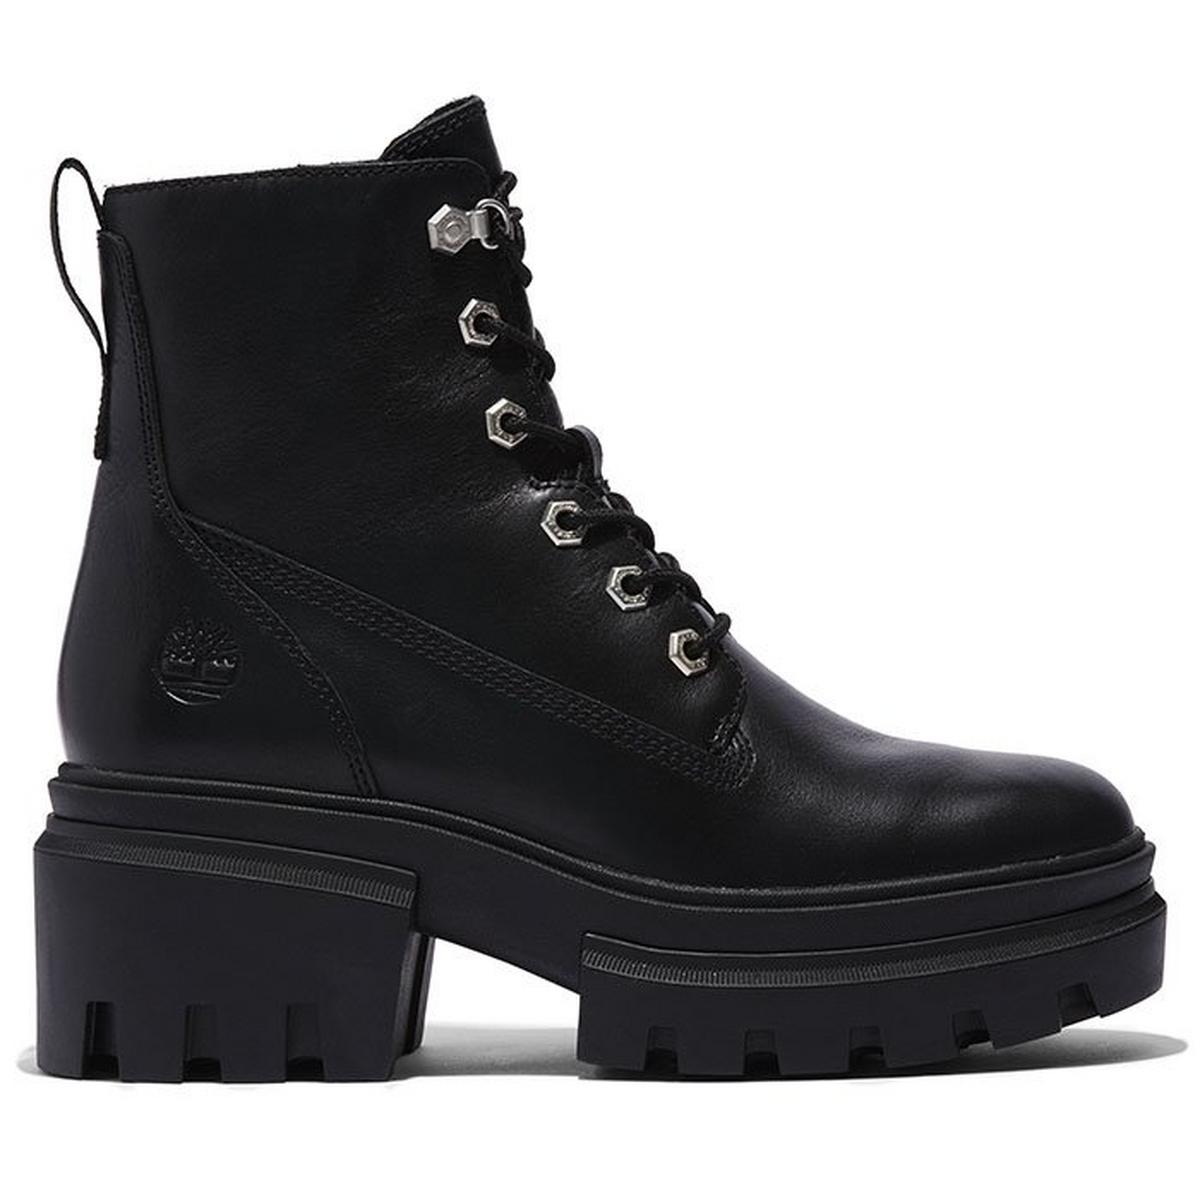 Women's Everleigh 6-Inch Lace-Up Boot